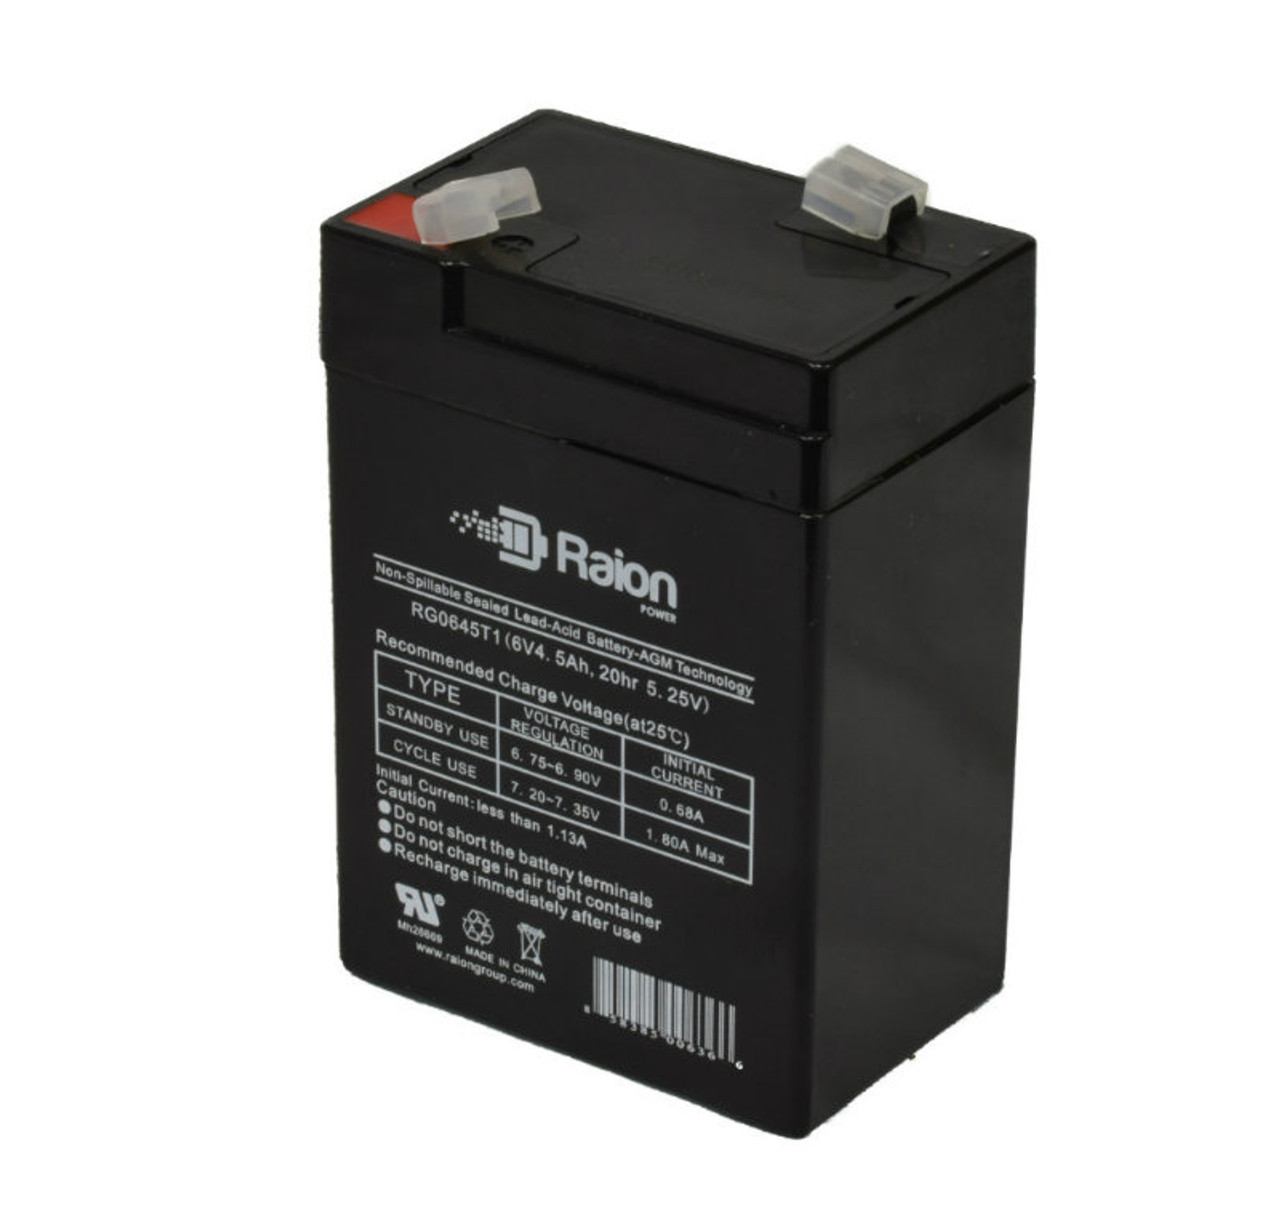 Raion Power RG0645T1 6V 4.5Ah Replacement Battery Cartridge for BCI Inc 6200 Patient Monitor